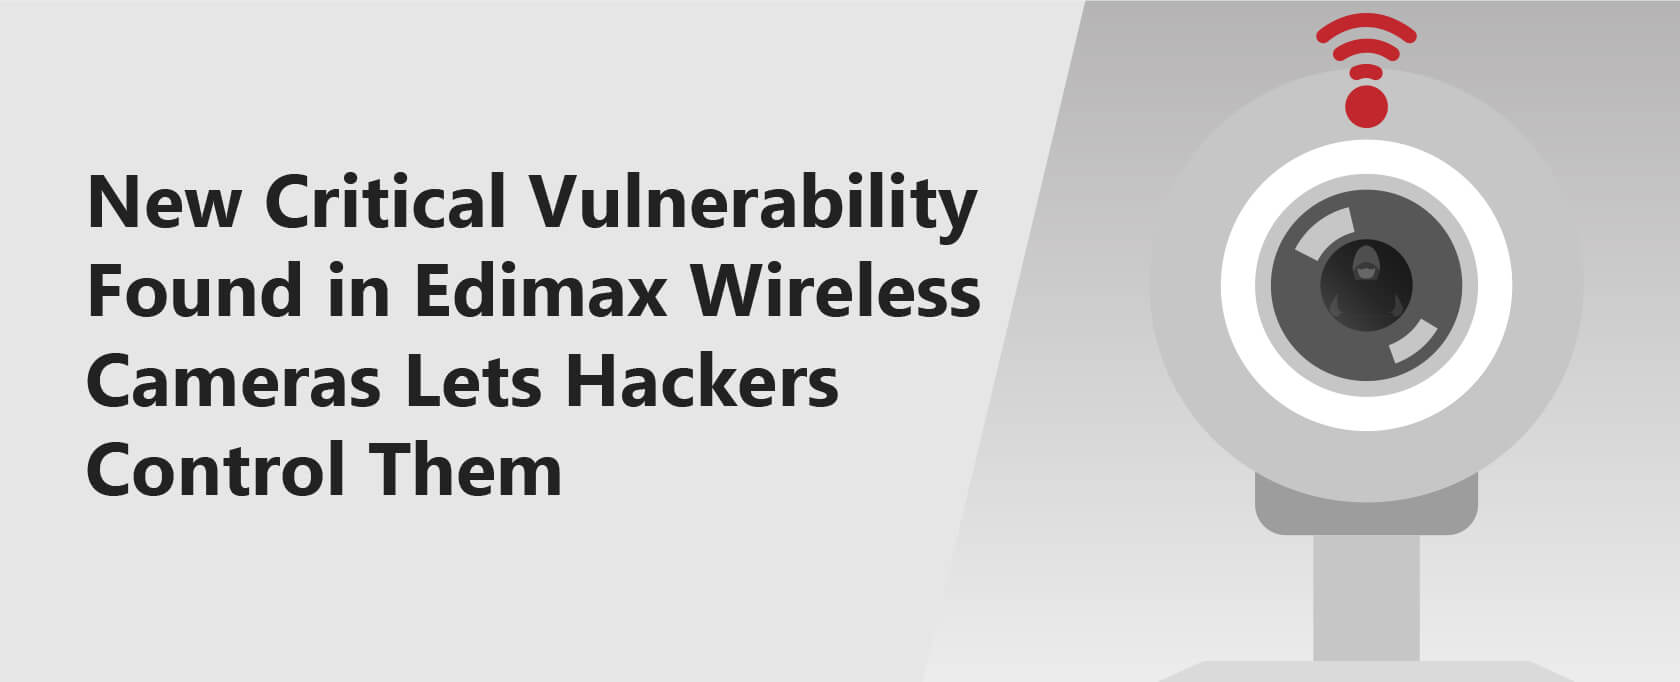 New Critical Vulnerability Found in Edimax Wireless Cameras Lets Hackers Control Them